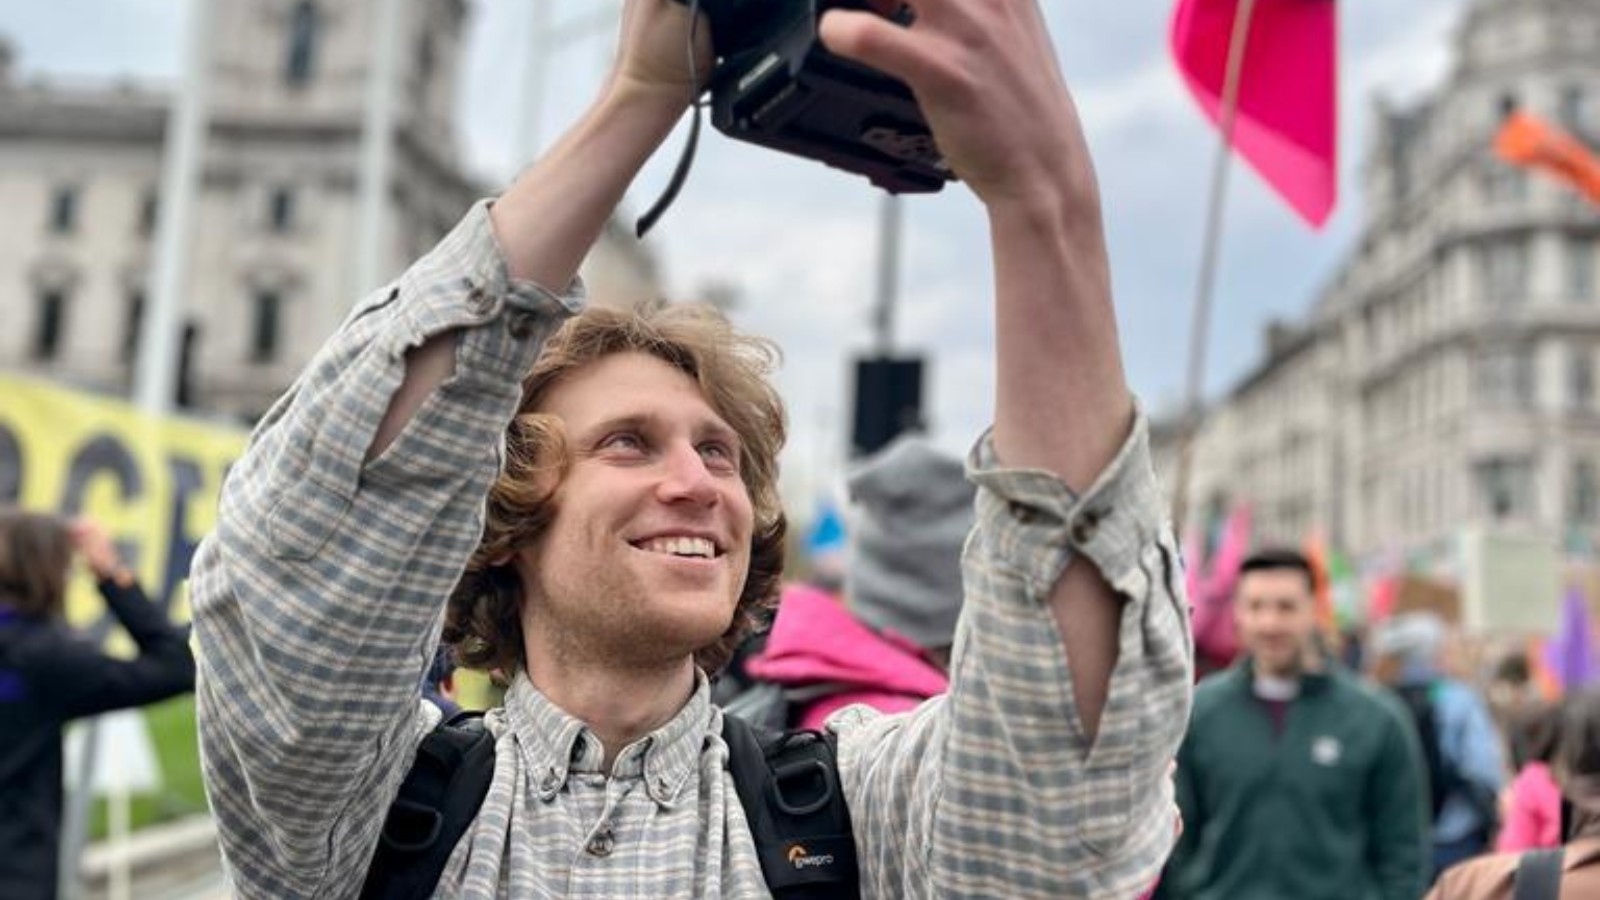 Rich Felgate is photographed filming at a march through a city, he is smiling and wearing a checkered shirt.